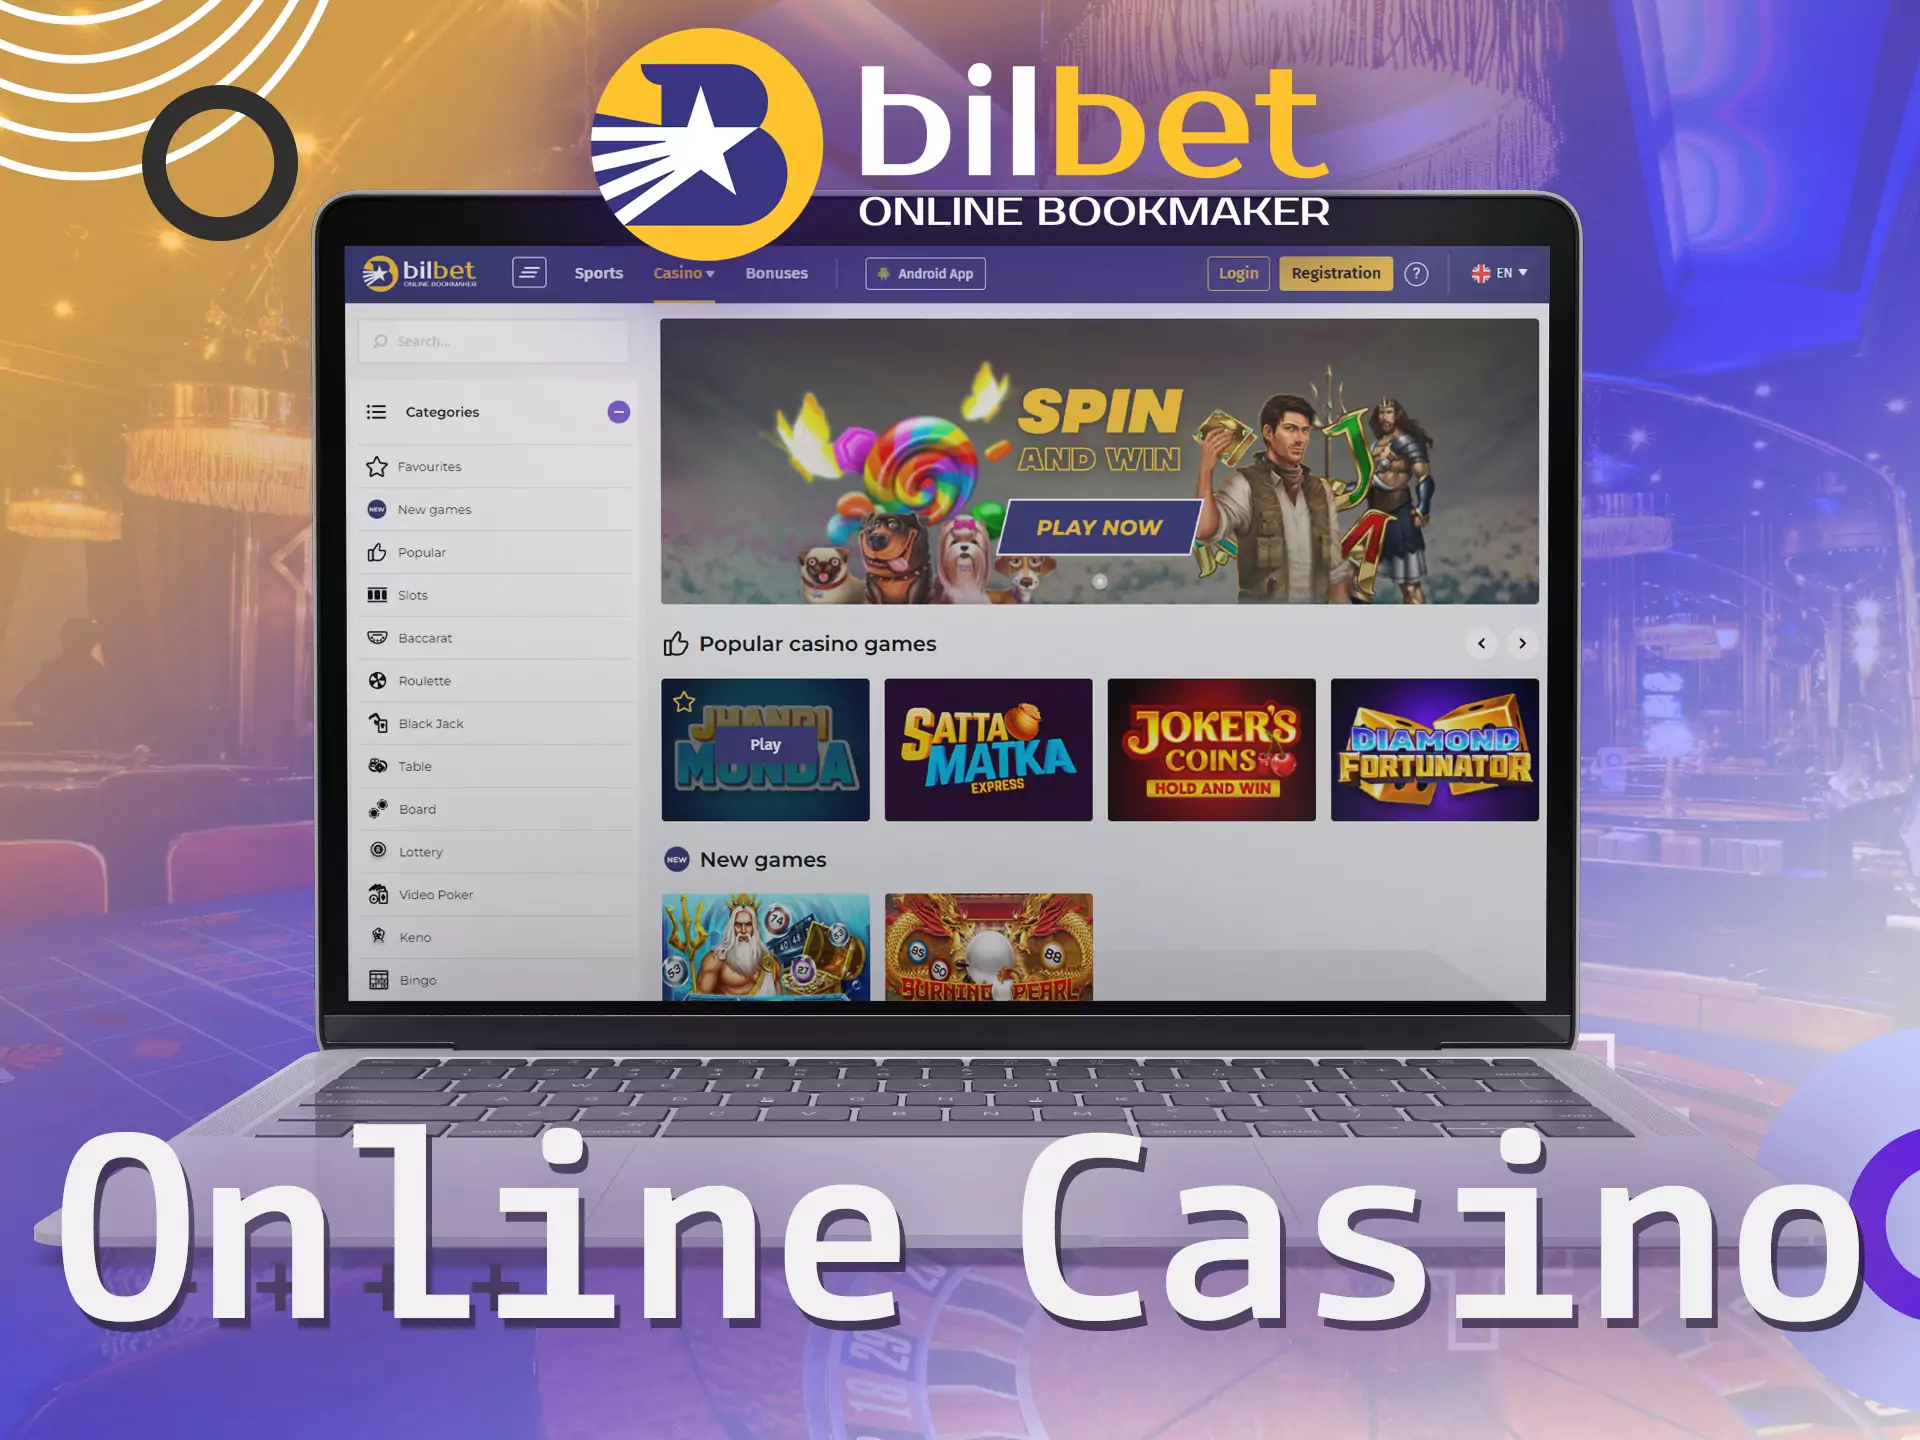 On Bilbet, there are a lot of casino games as well.